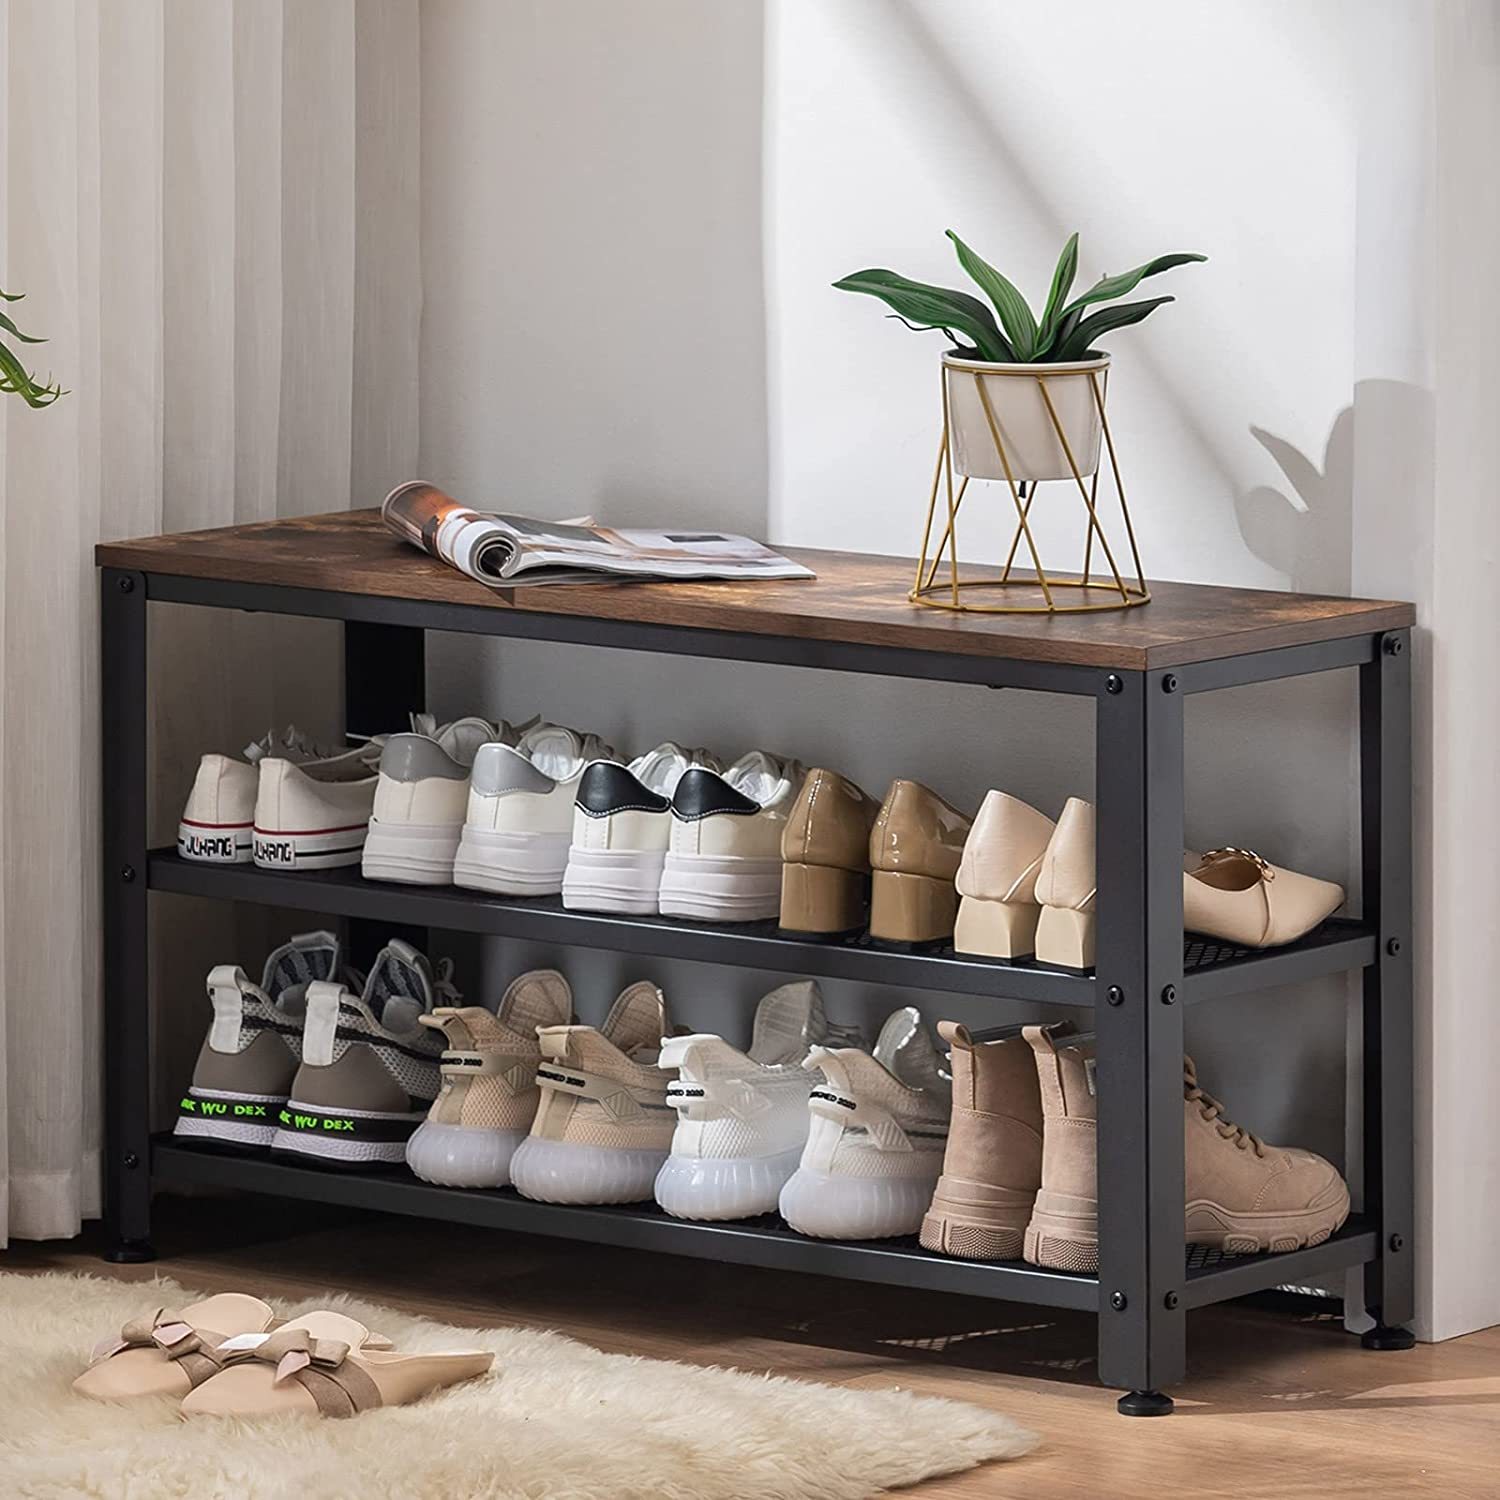 APICIZON Shoe Bench, 3-Tier 35.5 Inches Shoe Rack for Entryway with Long Seat - $90.99